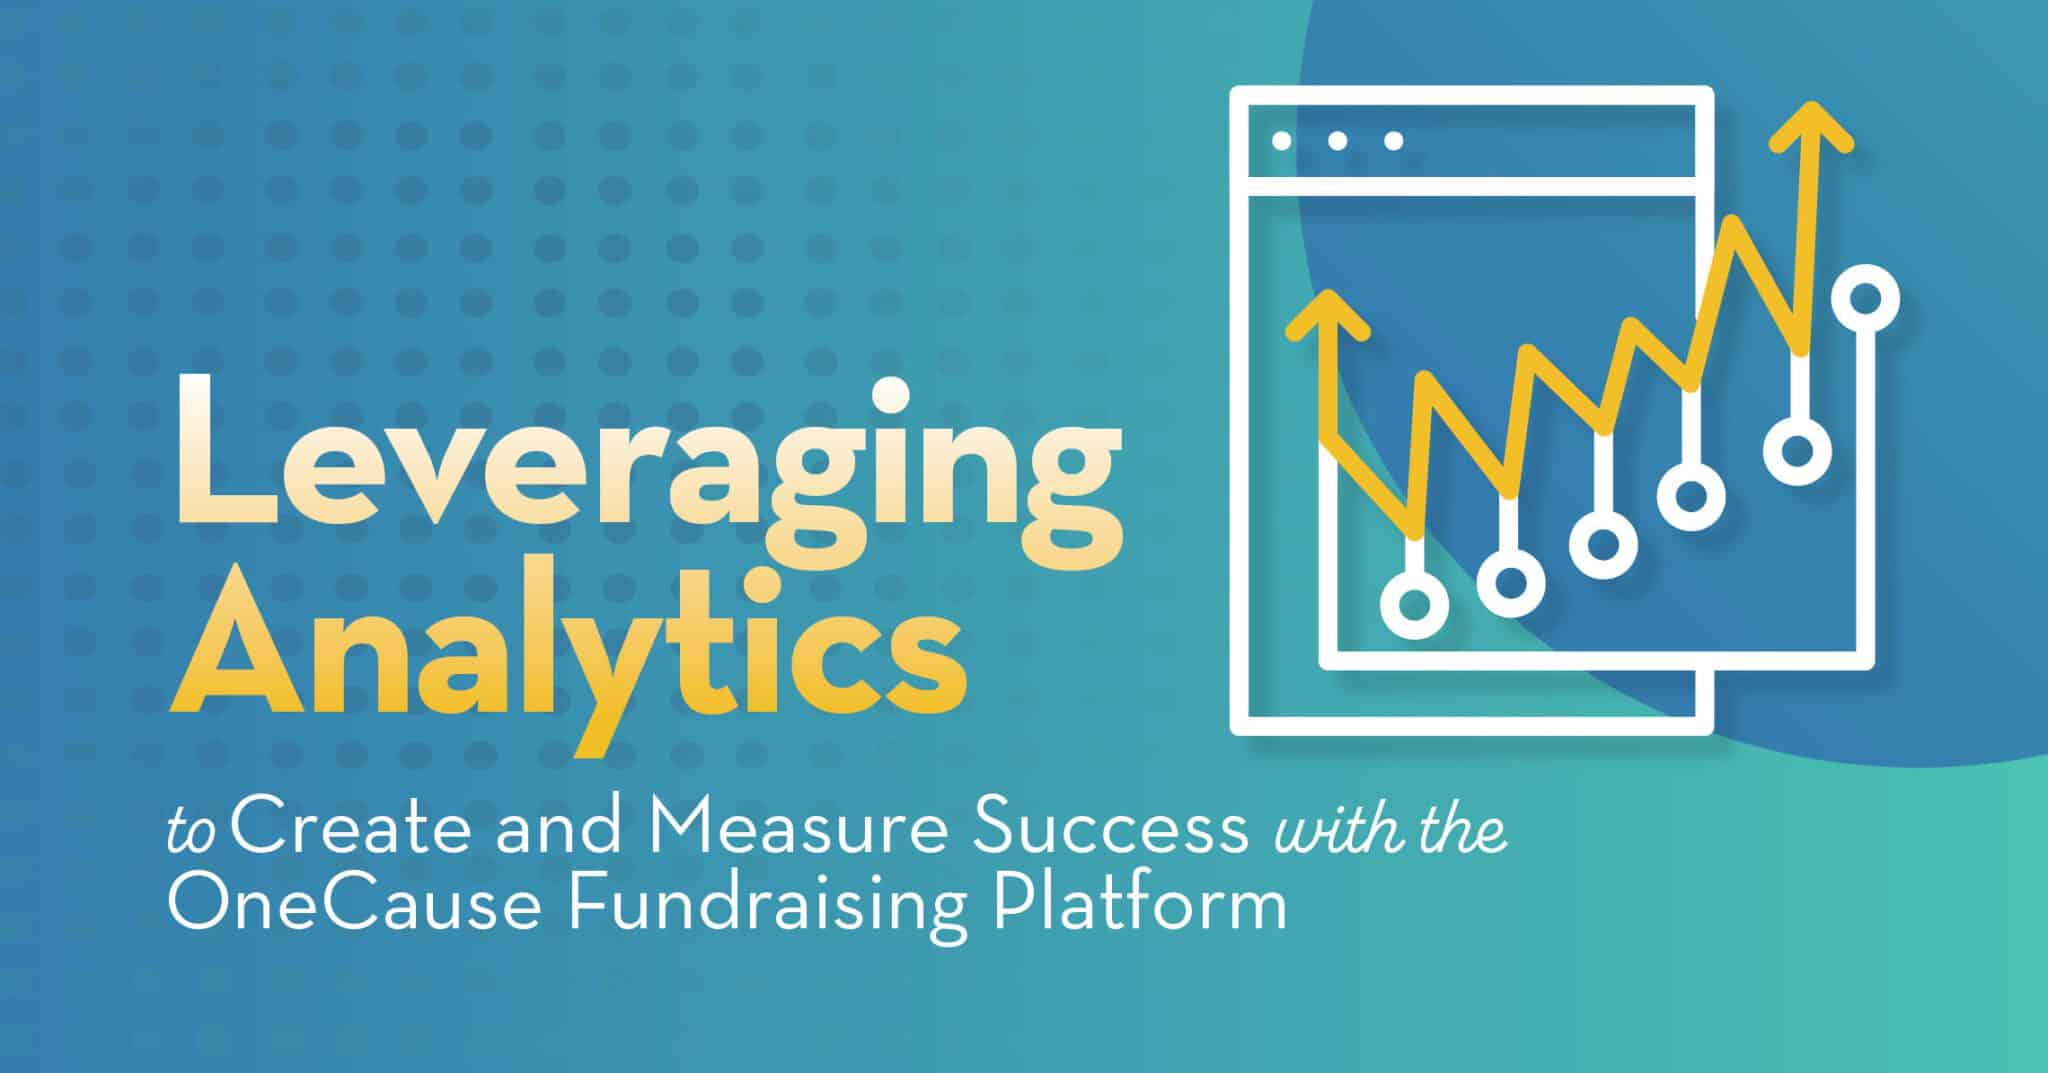 Leveraging Analytics to Create and Measure Success with the OneCause Fundraising Platform